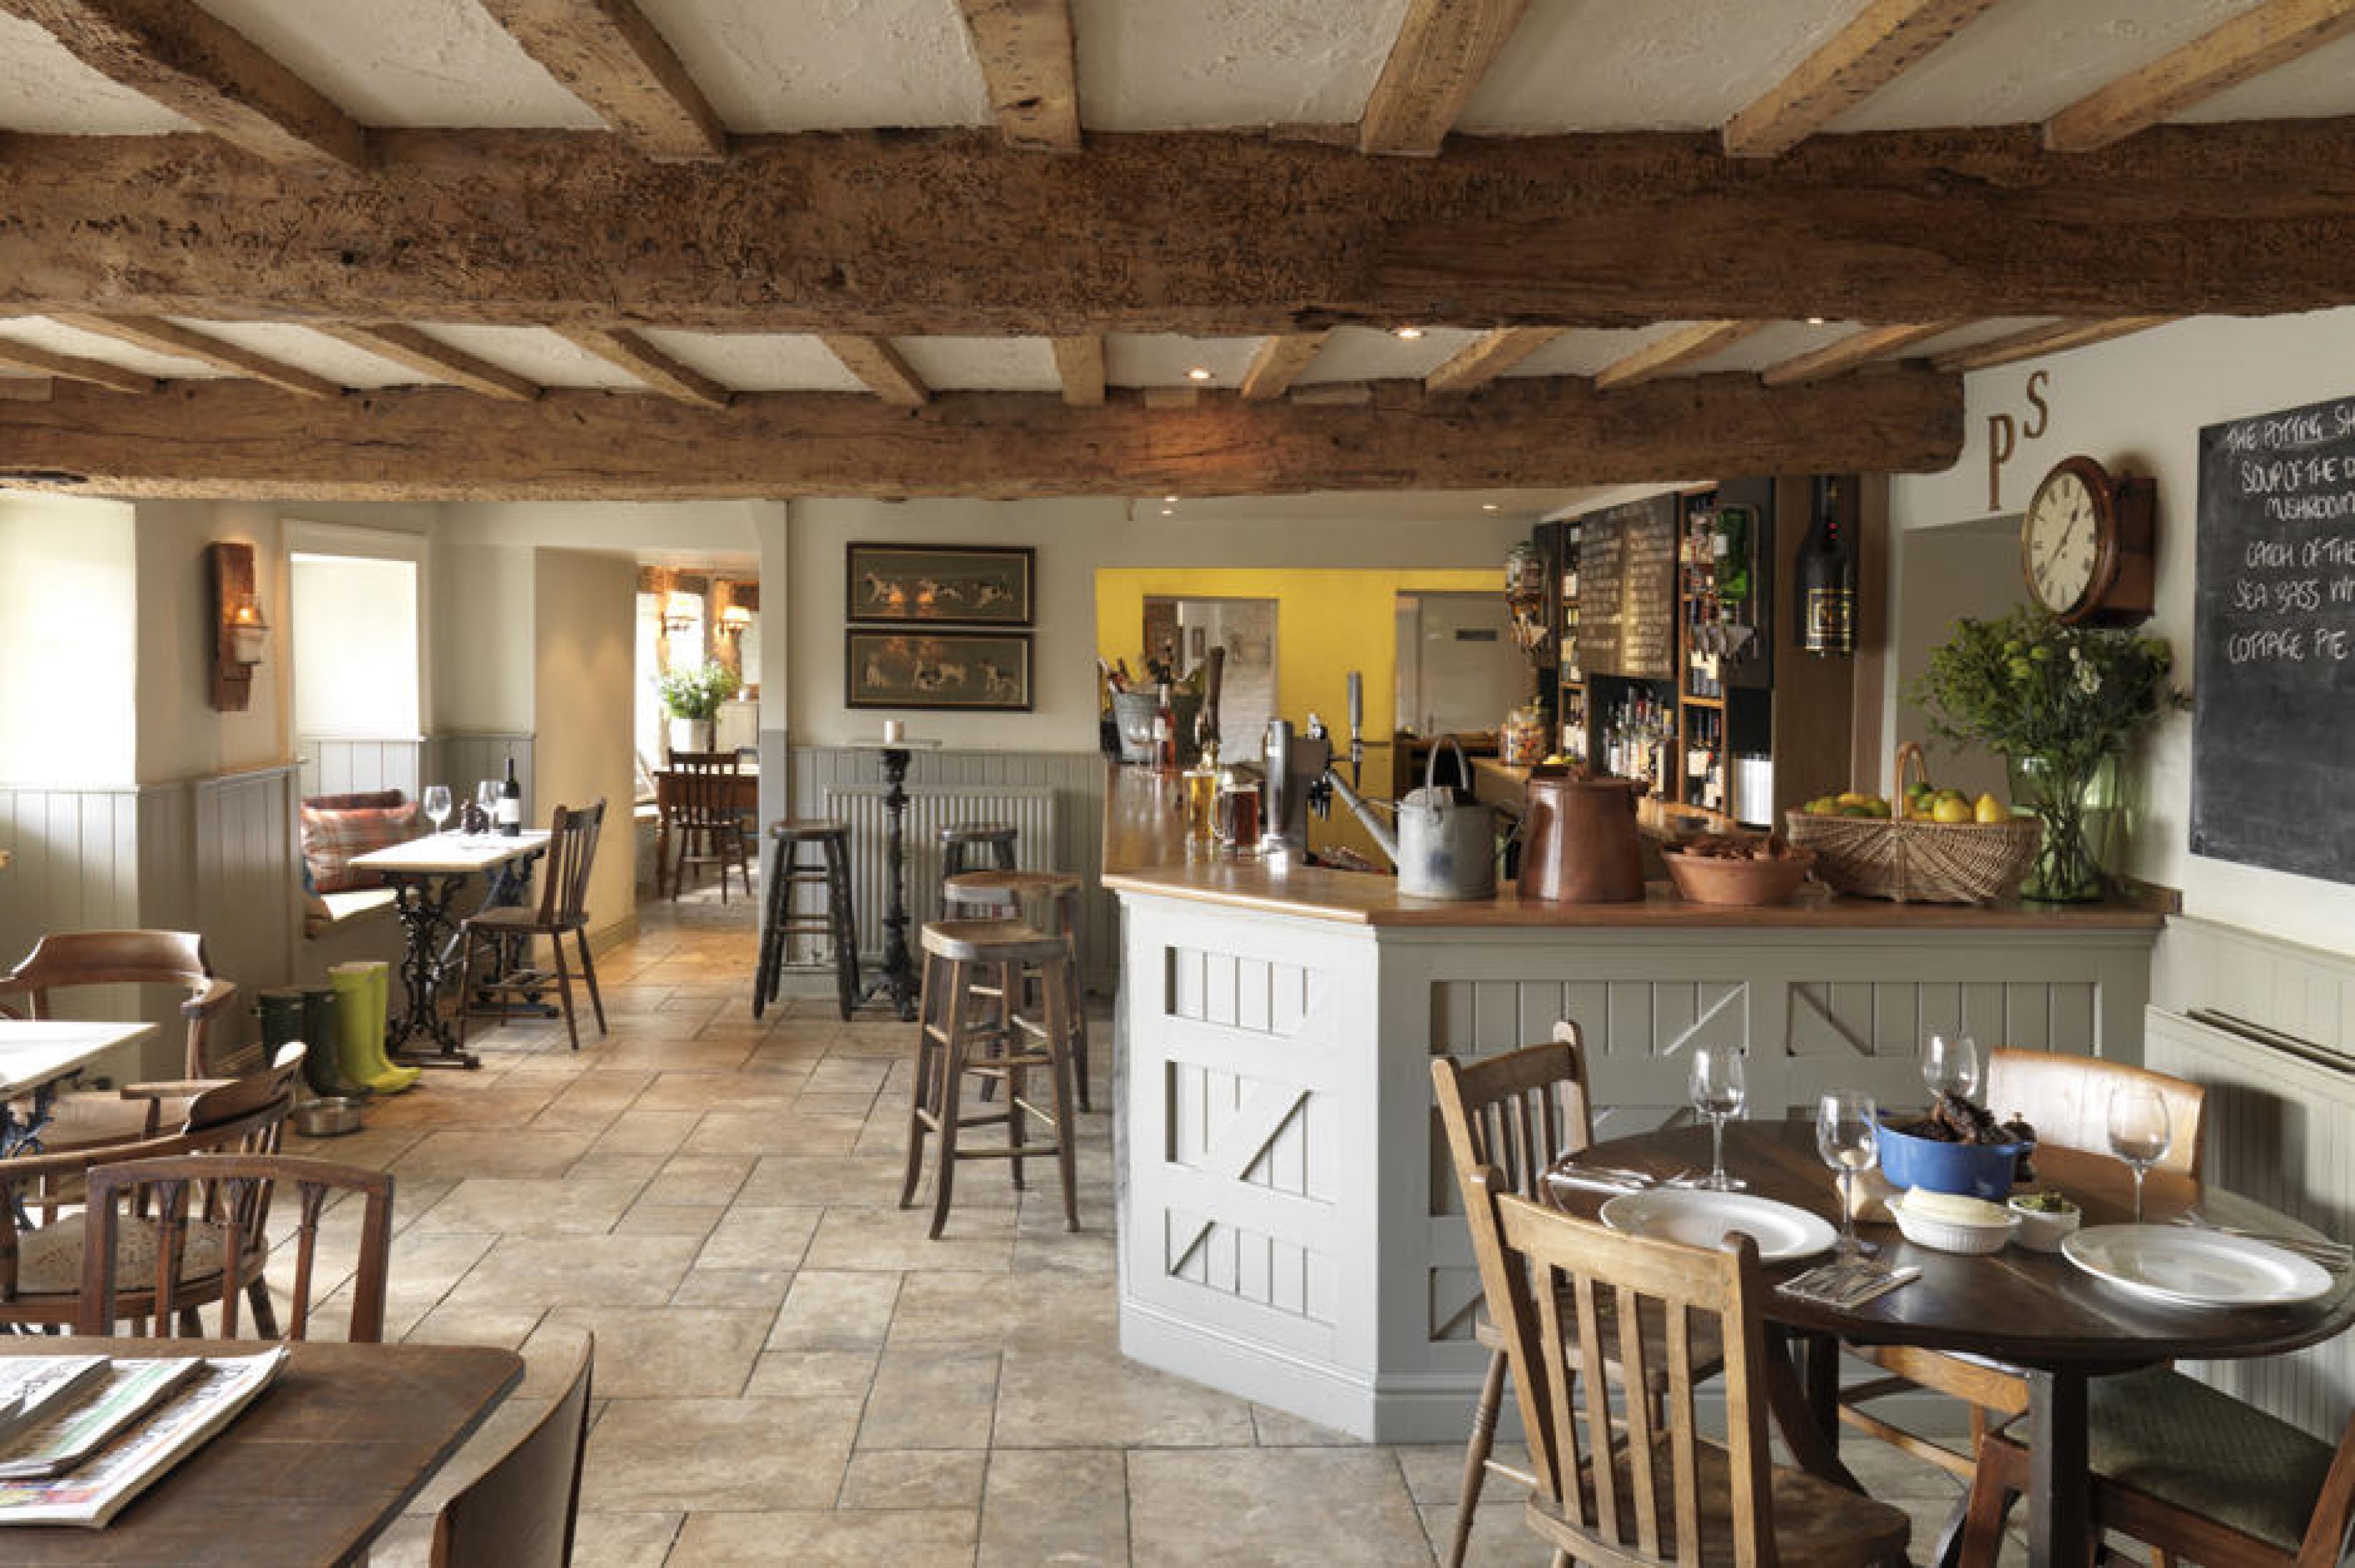 Interiors at Potting Shed Pub, Cotswolds, England